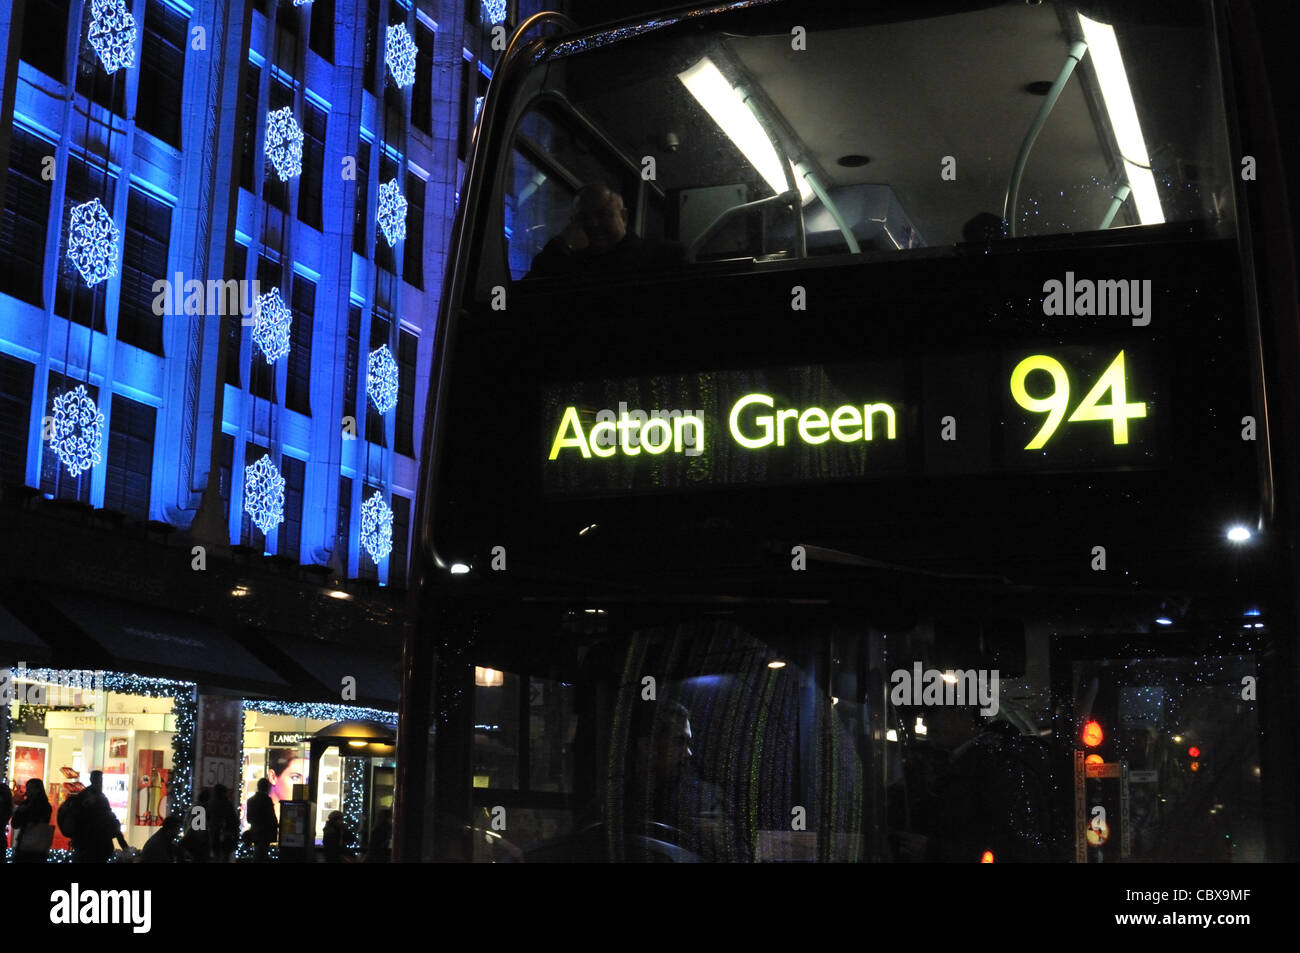 Number 94 bus for Acton Green by House of Fraser department store on Oxford Street lit up by Christmas lights, London, UK. Stock Photo